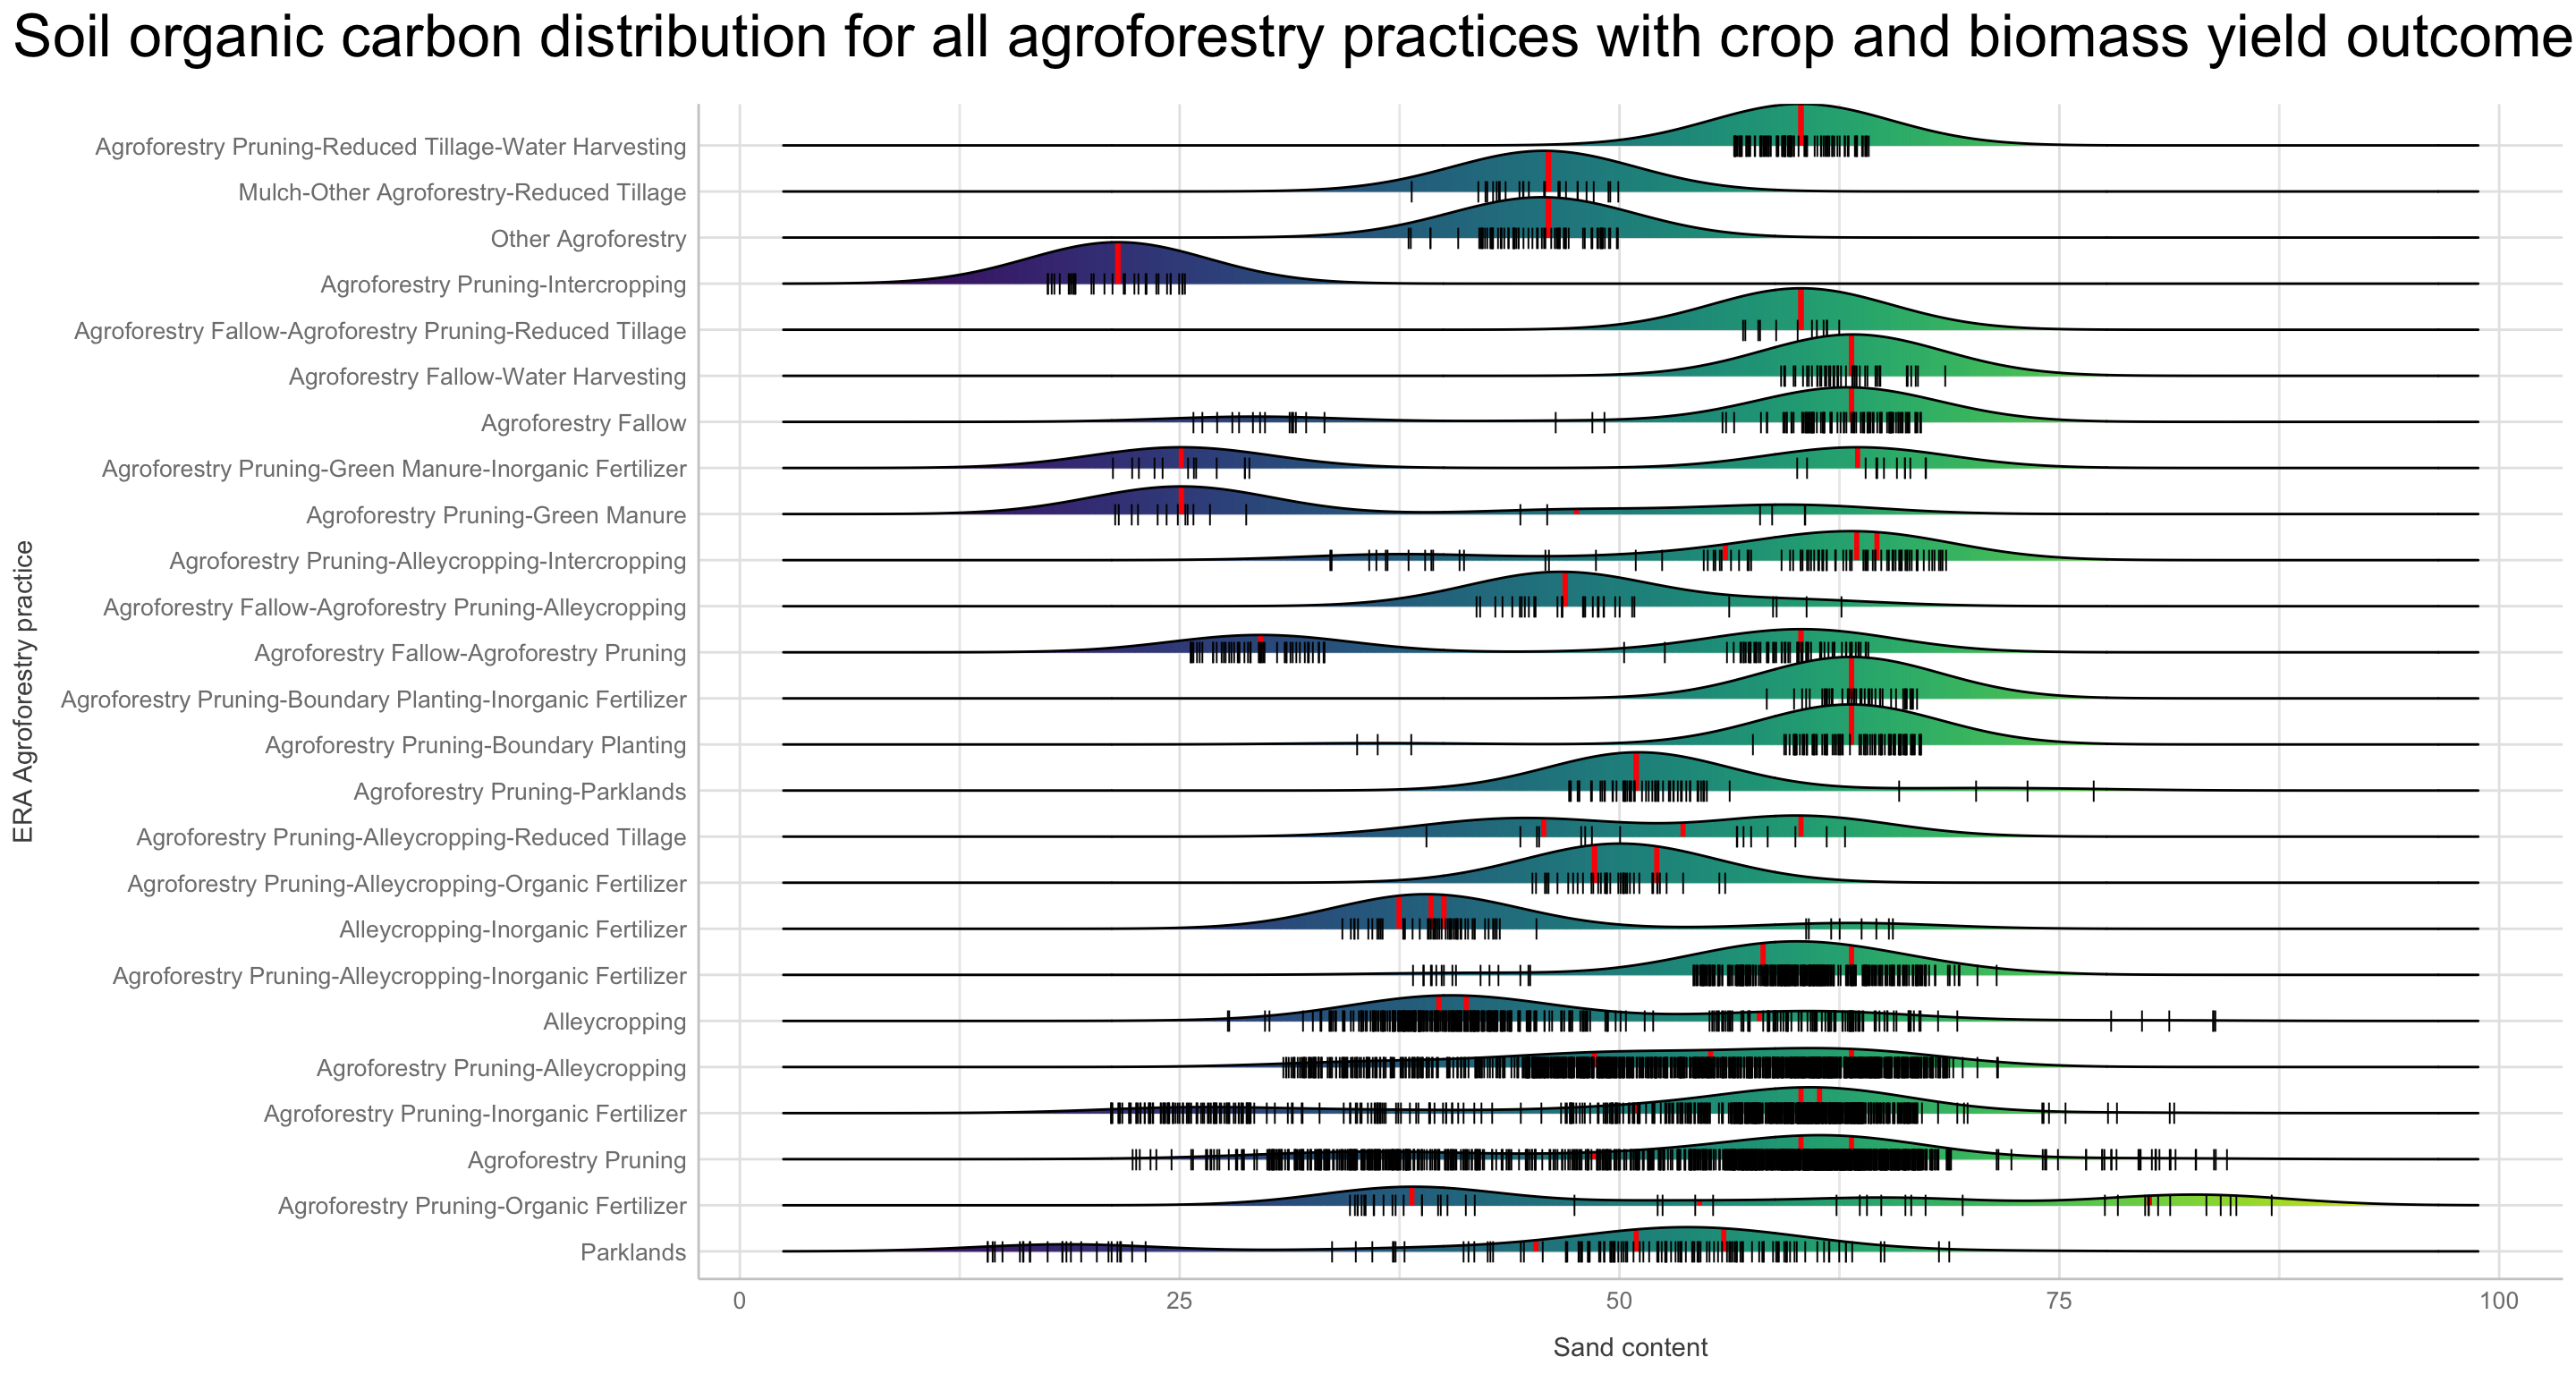 Density ridge plot for sand content distribution across all agroforestry practices